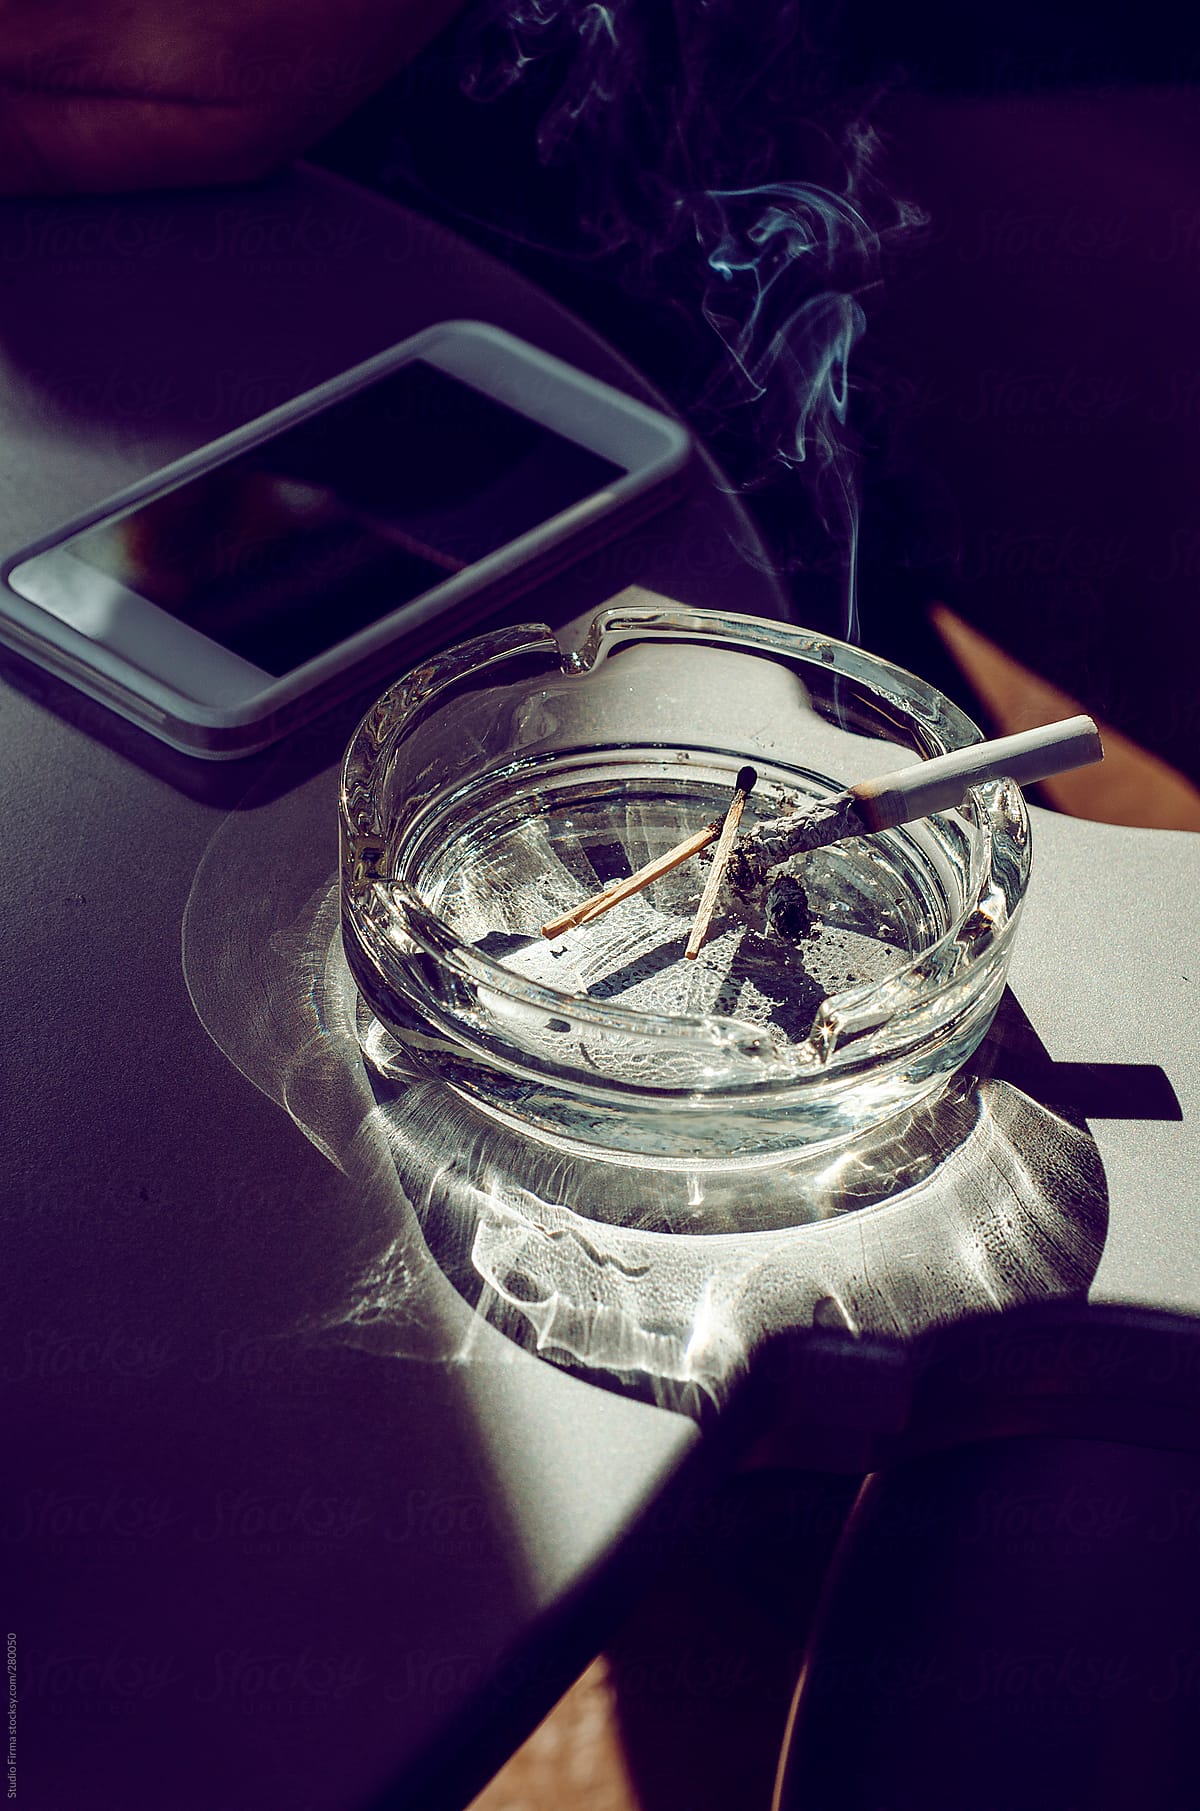 ashtray with smoking cigarette on the table